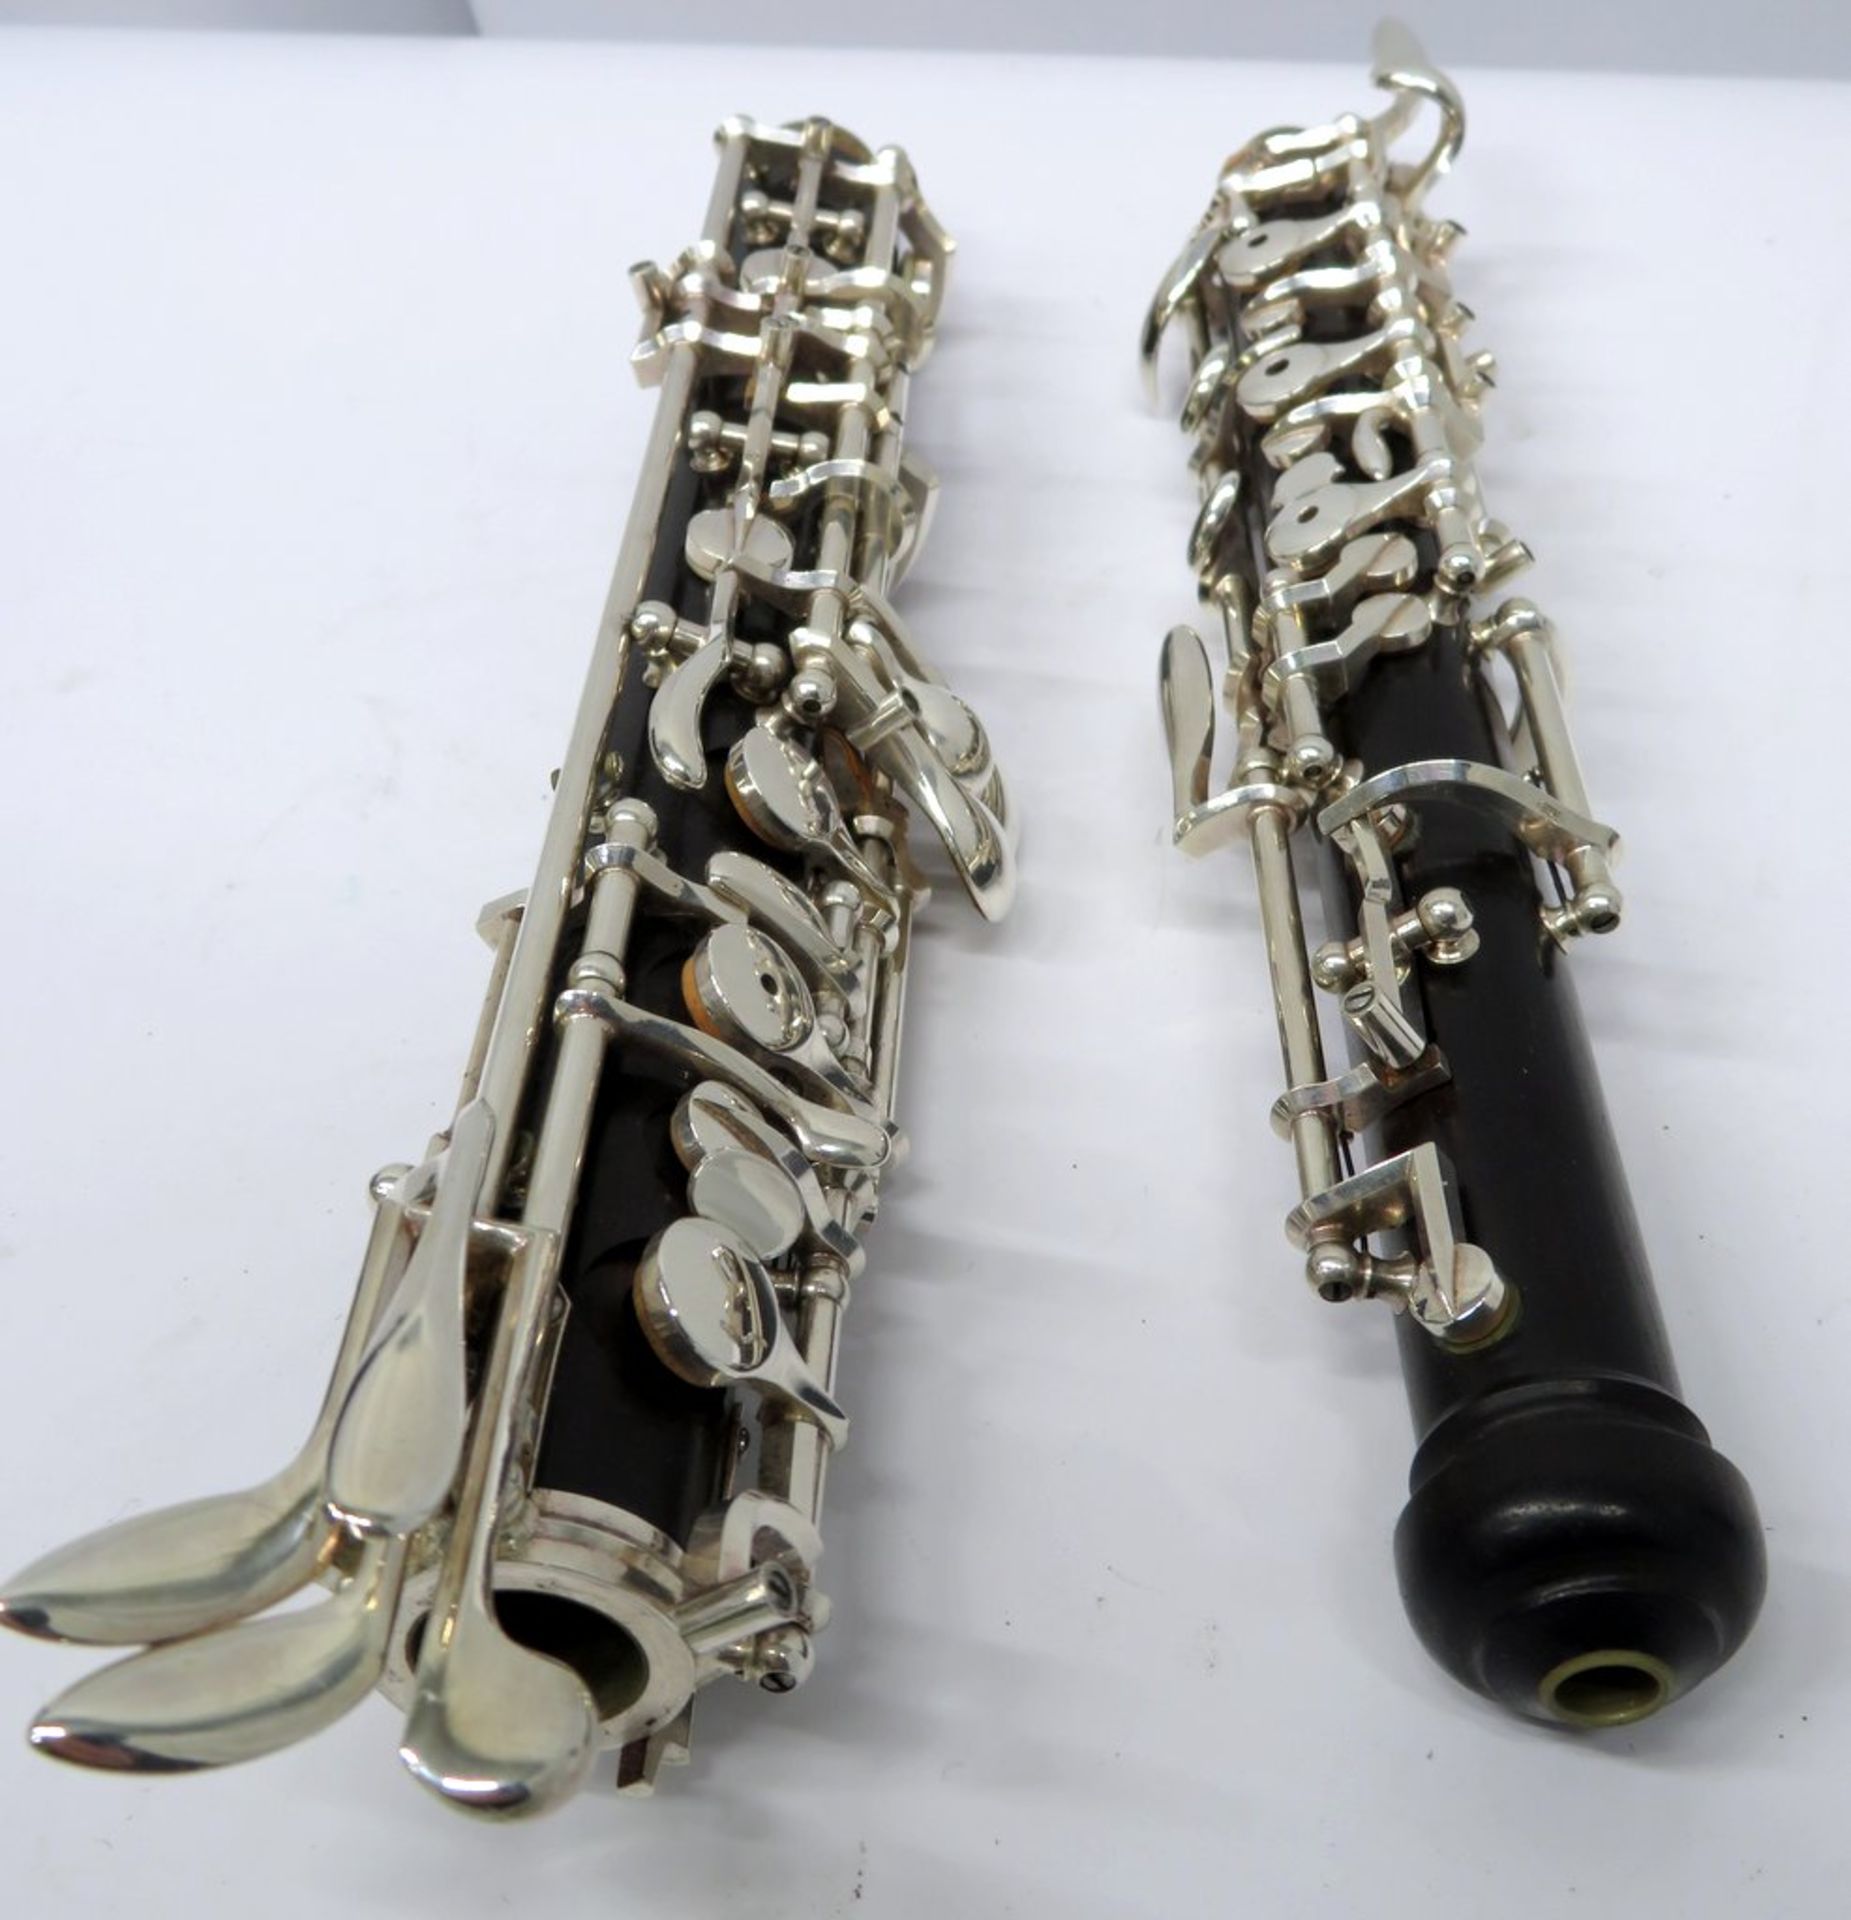 Howarth Of London S40c Oboe Complete With Case. - Image 7 of 20